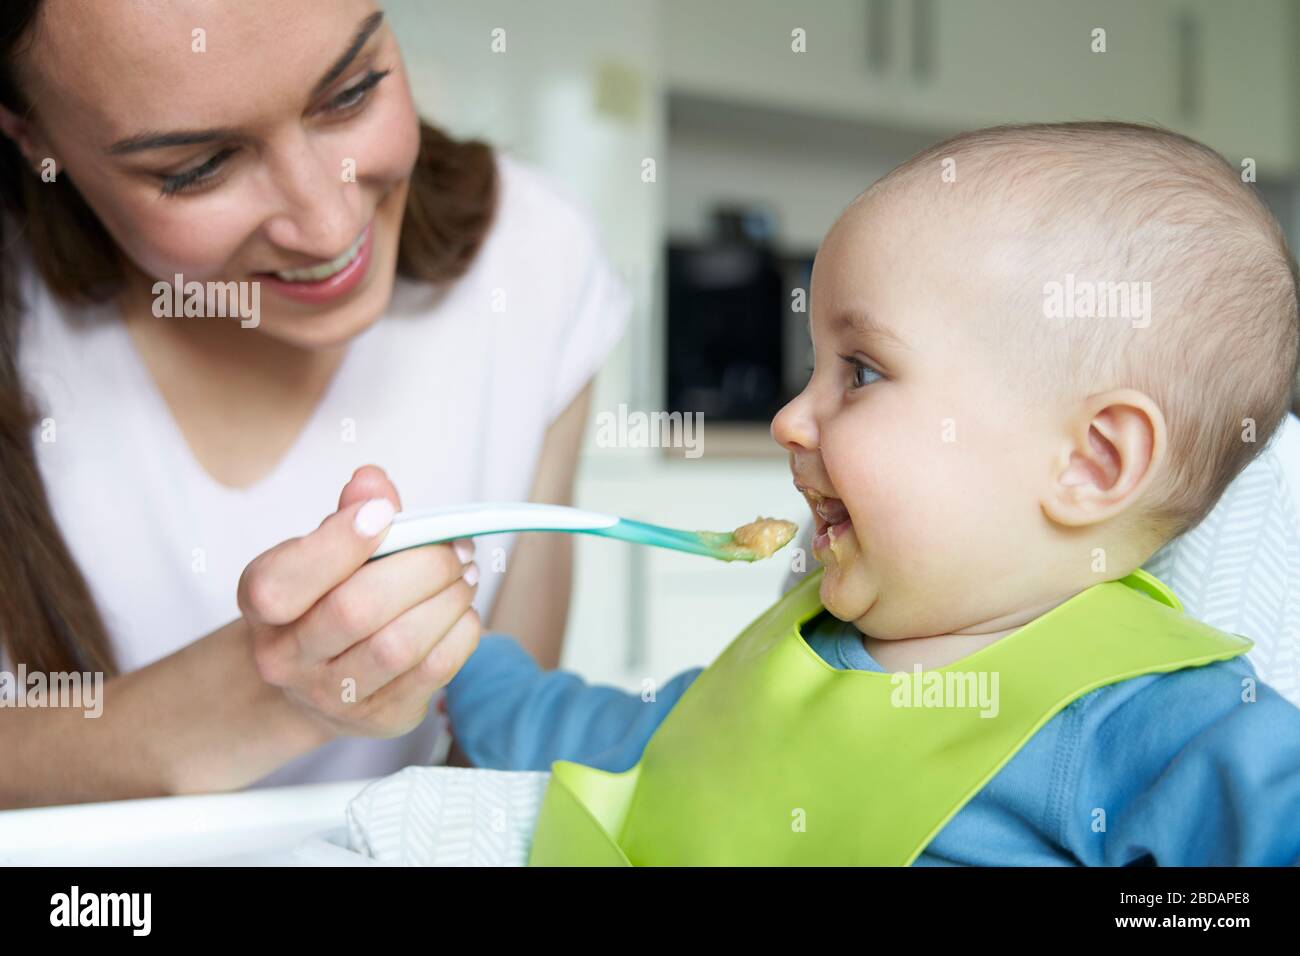 Smiling 8 month Old Baby Boy At Home In High Chair Being Fed Solid Food By Mother With Spoon Stock Photo